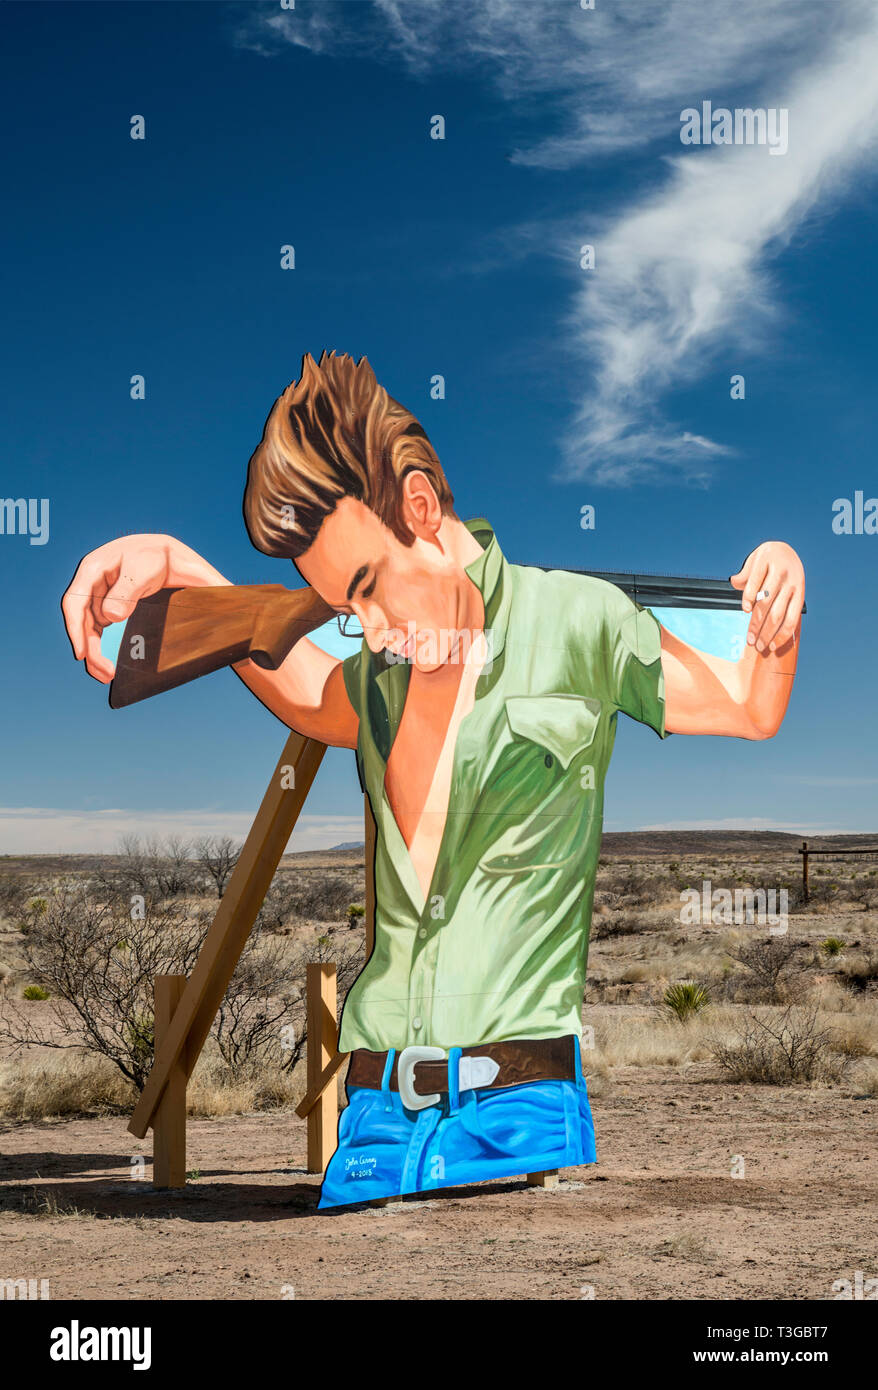 Giant Marfa, outdoor roadside mural, showing James Dean in scene from Giant movie, created by John Cerney in 2018, near Marfa, Texas, USA Stock Photo